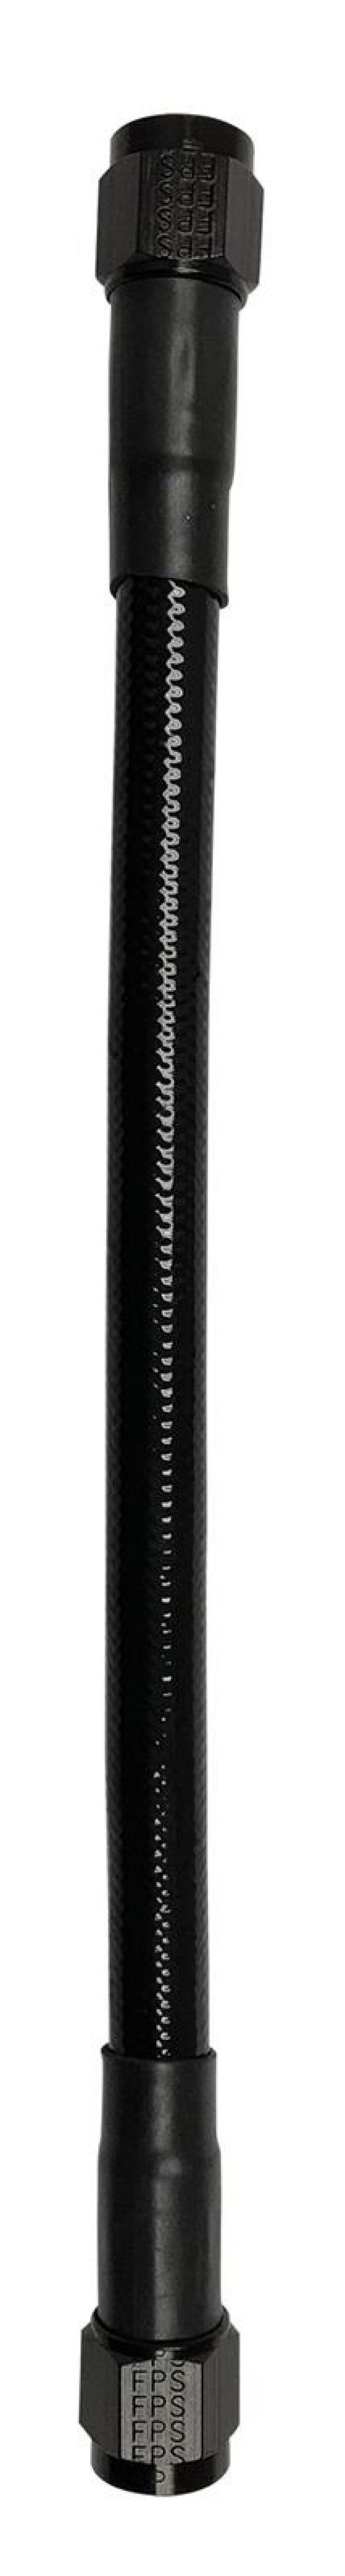 Fragola -6AN Ext Black PTFE Hose Assembly Straight x Straight 30in - 6026-1-1-30BL